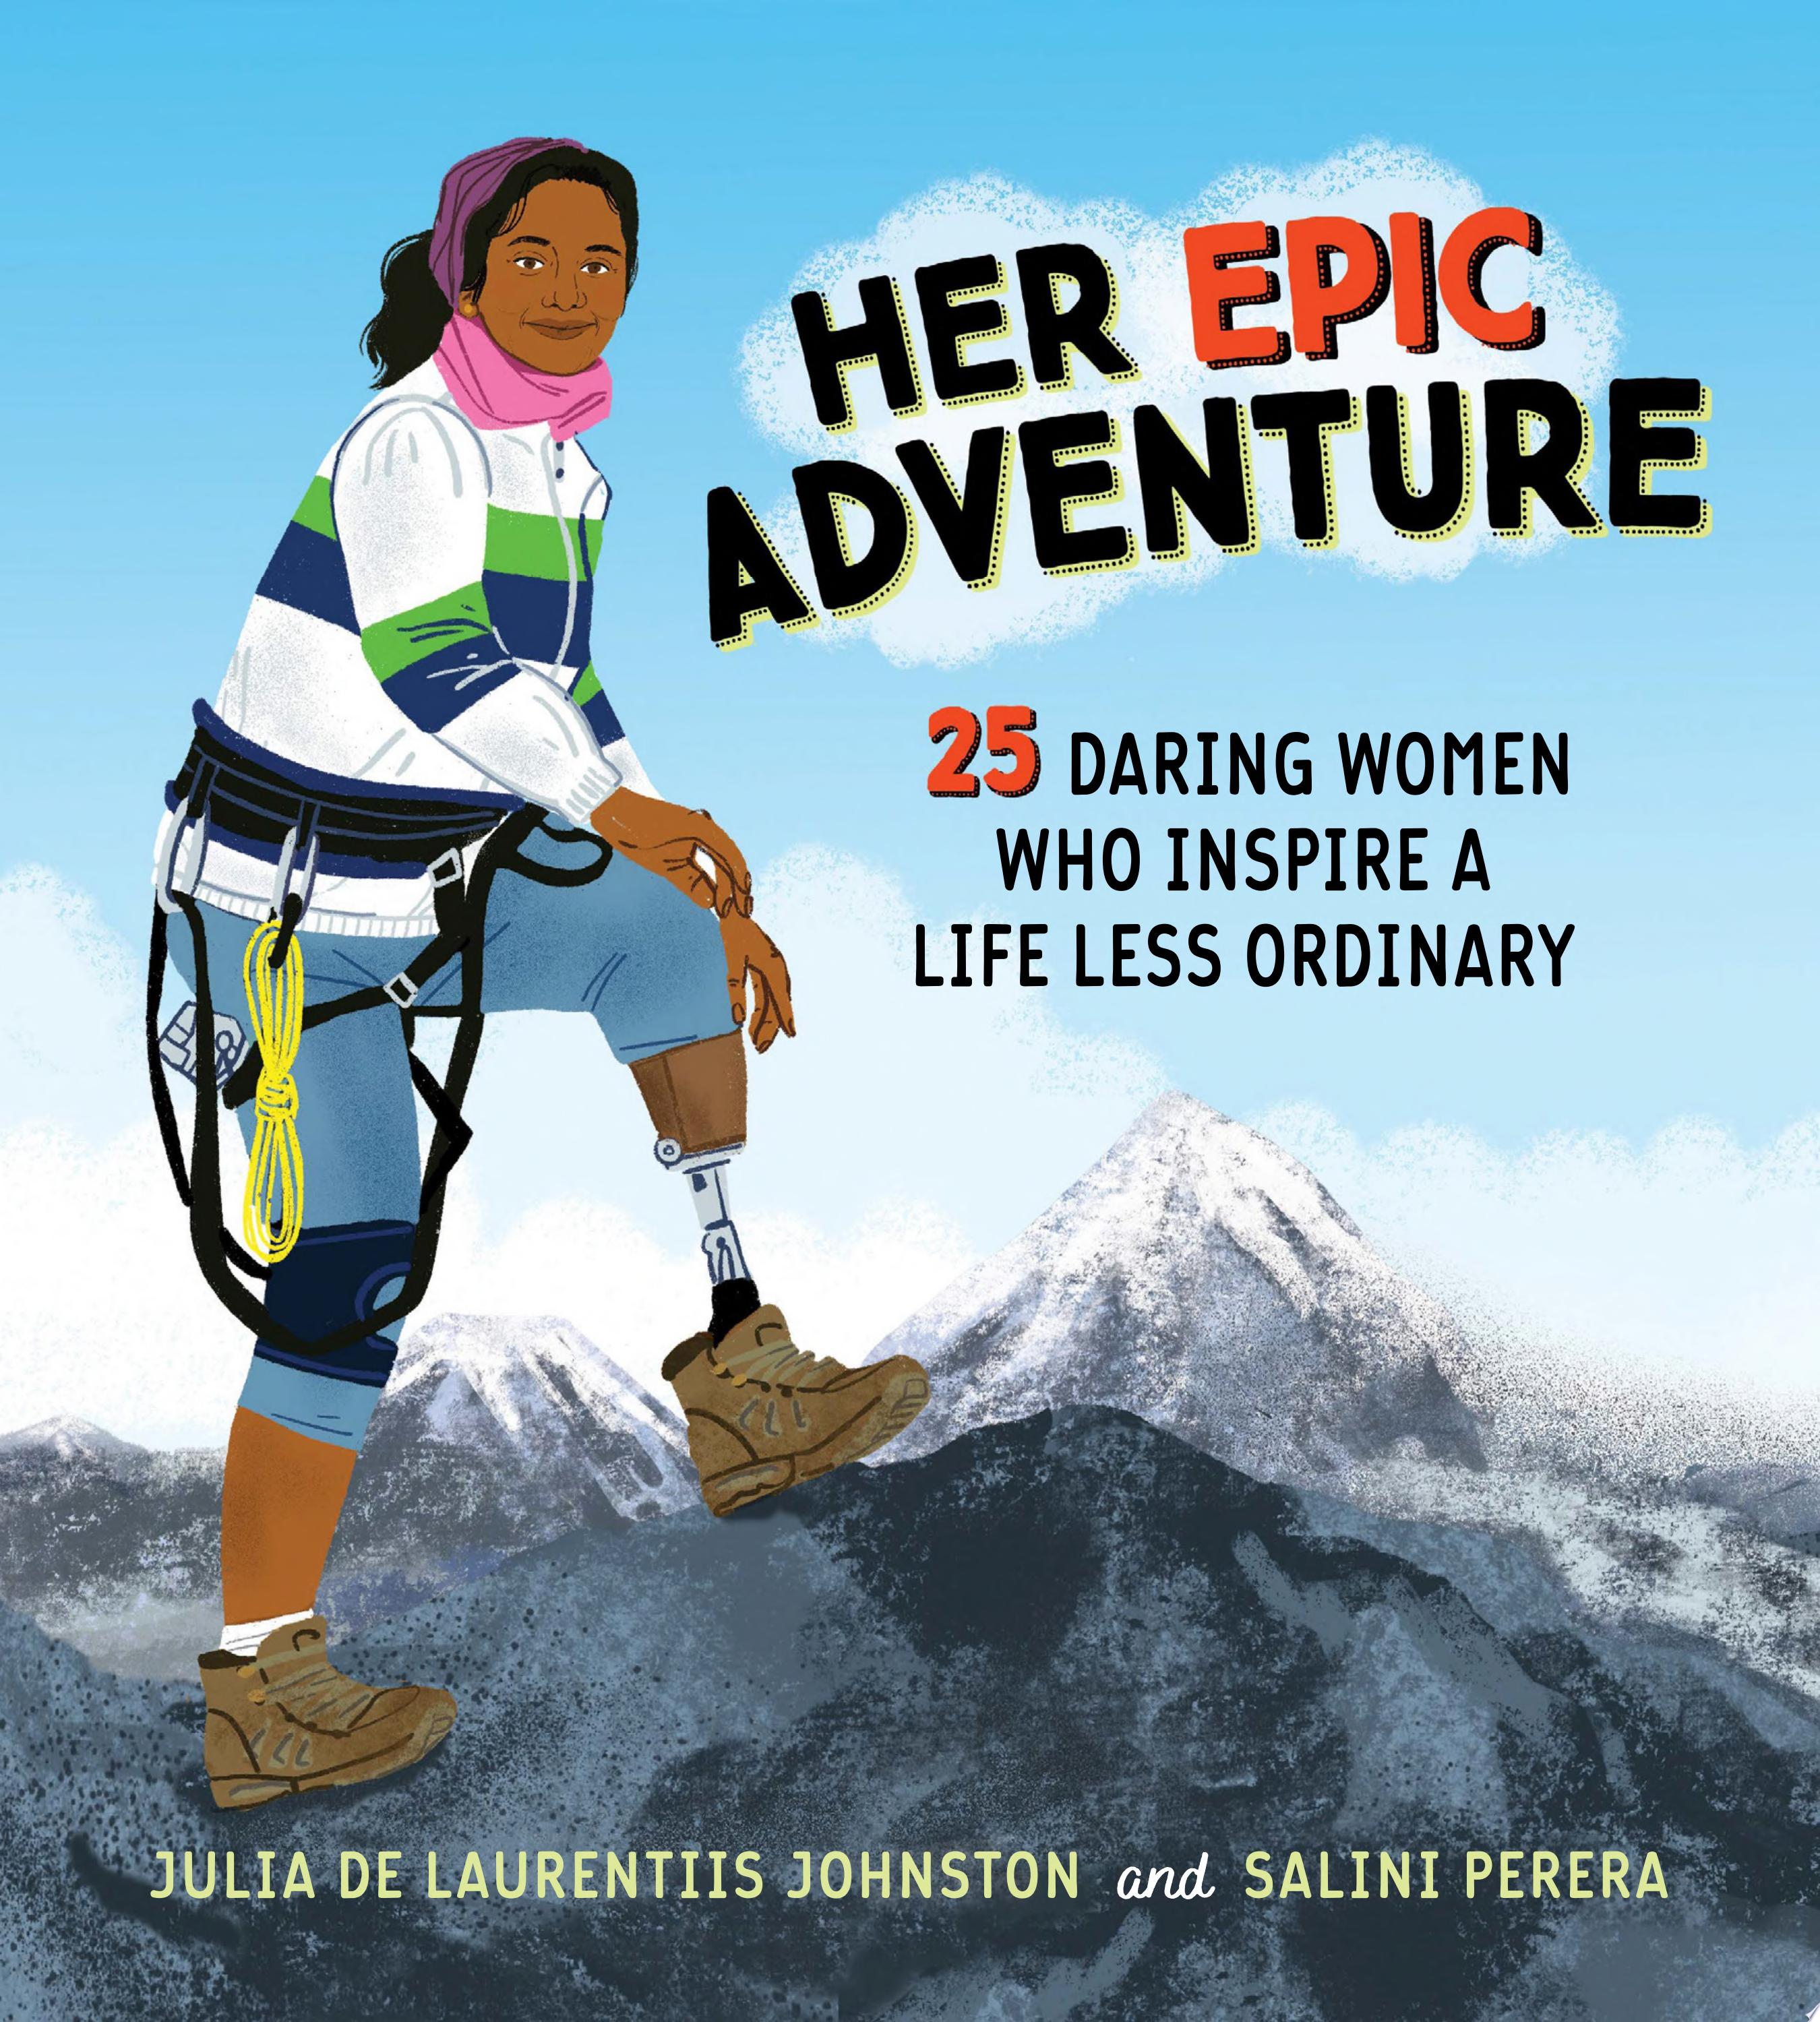 Image for "Her Epic Adventure"